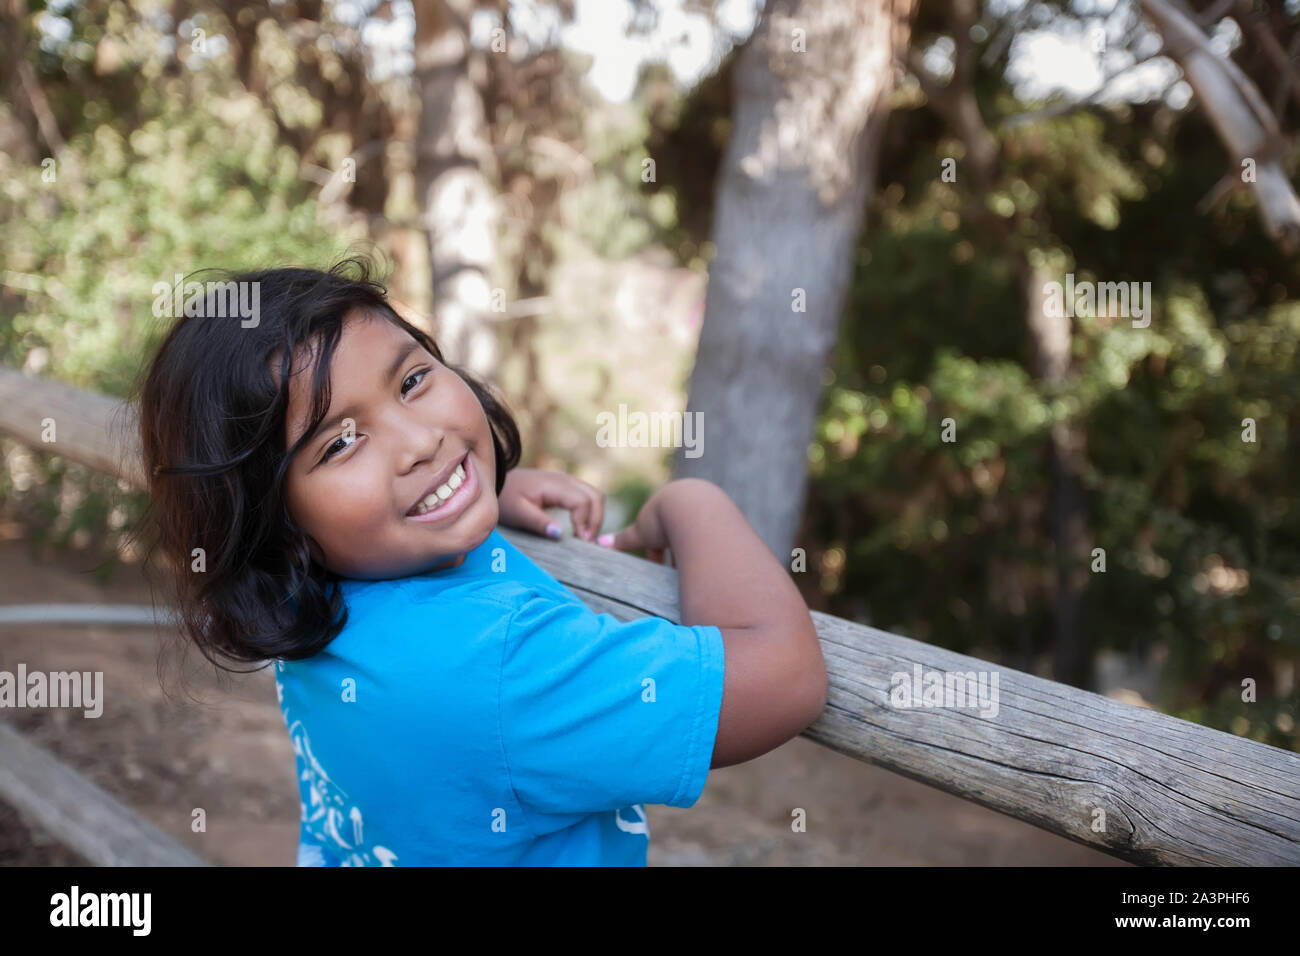 A little girl with a big smile who is holding on to a wooden fence and surrounded by trees in a natural environment. Stock Photo